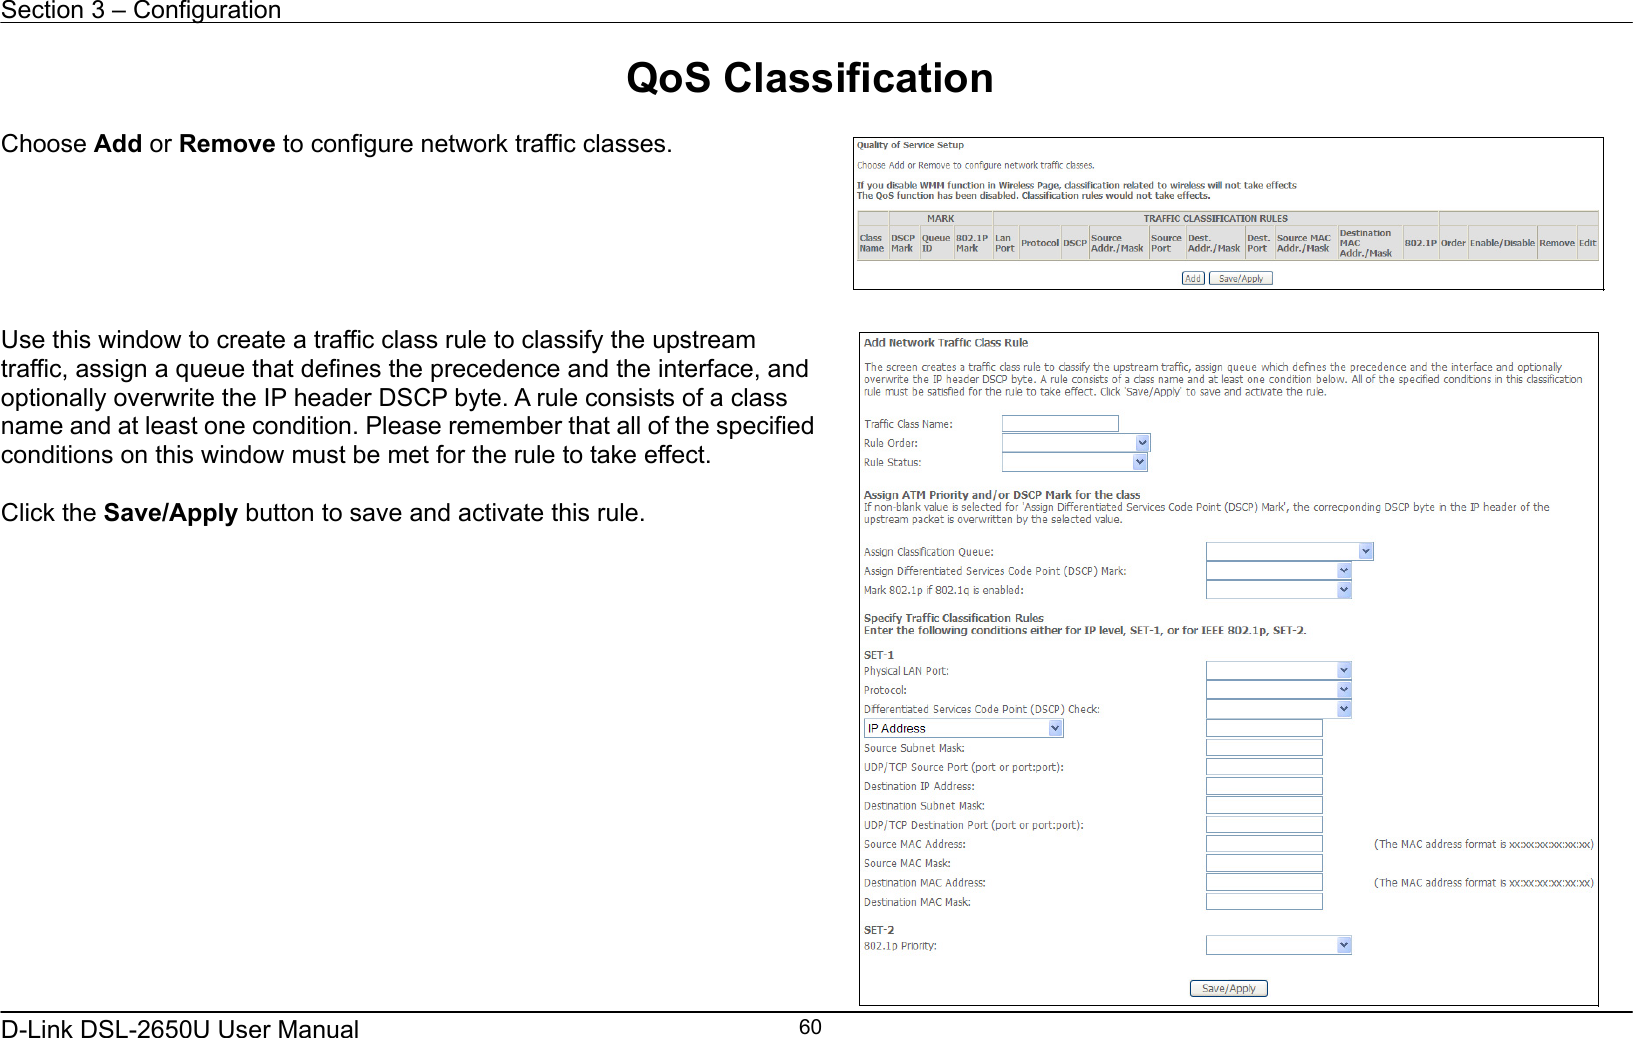 Section 3 – Configuration   D-Link DSL-2650U User Manual    60QoS Classification  Choose Add or Remove to configure network traffic classes.       Use this window to create a traffic class rule to classify the upstream traffic, assign a queue that defines the precedence and the interface, and optionally overwrite the IP header DSCP byte. A rule consists of a class name and at least one condition. Please remember that all of the specified conditions on this window must be met for the rule to take effect.  Click the Save/Apply button to save and activate this rule.    